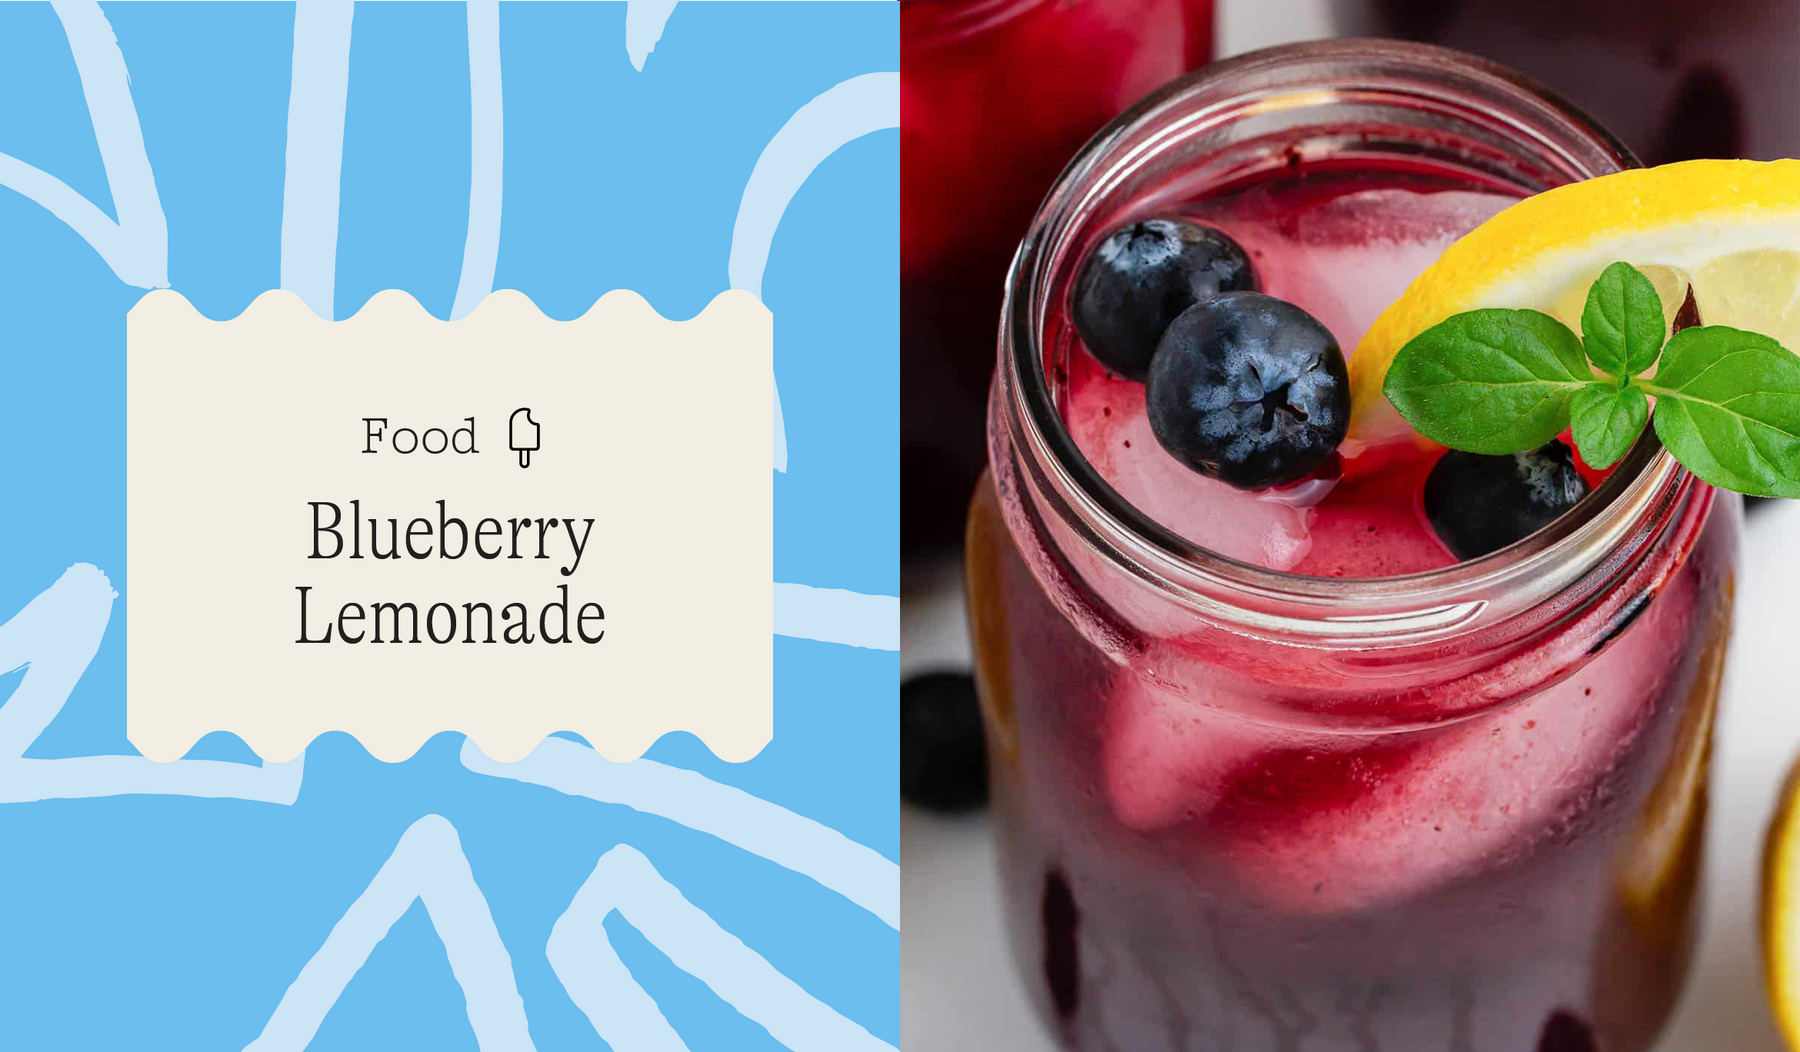 Primary Color Camp: How to Make Blueberry Lemonade